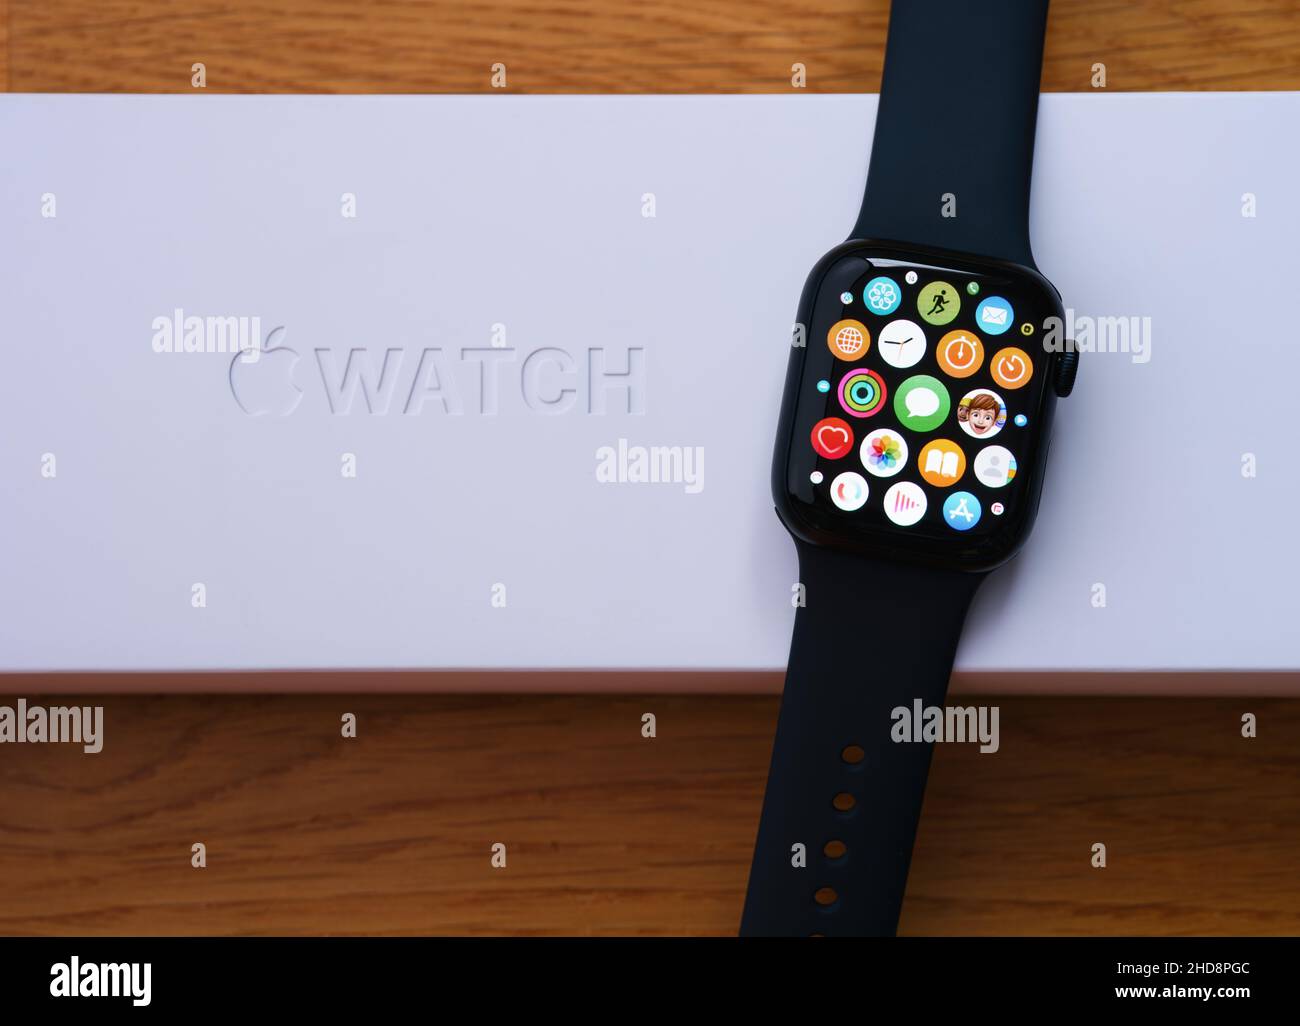 Tambov, Russian Federation - December 14, 2021 An Apple Watch series 7 with apps on its screen lying on its box. Wooden background. Stock Photo